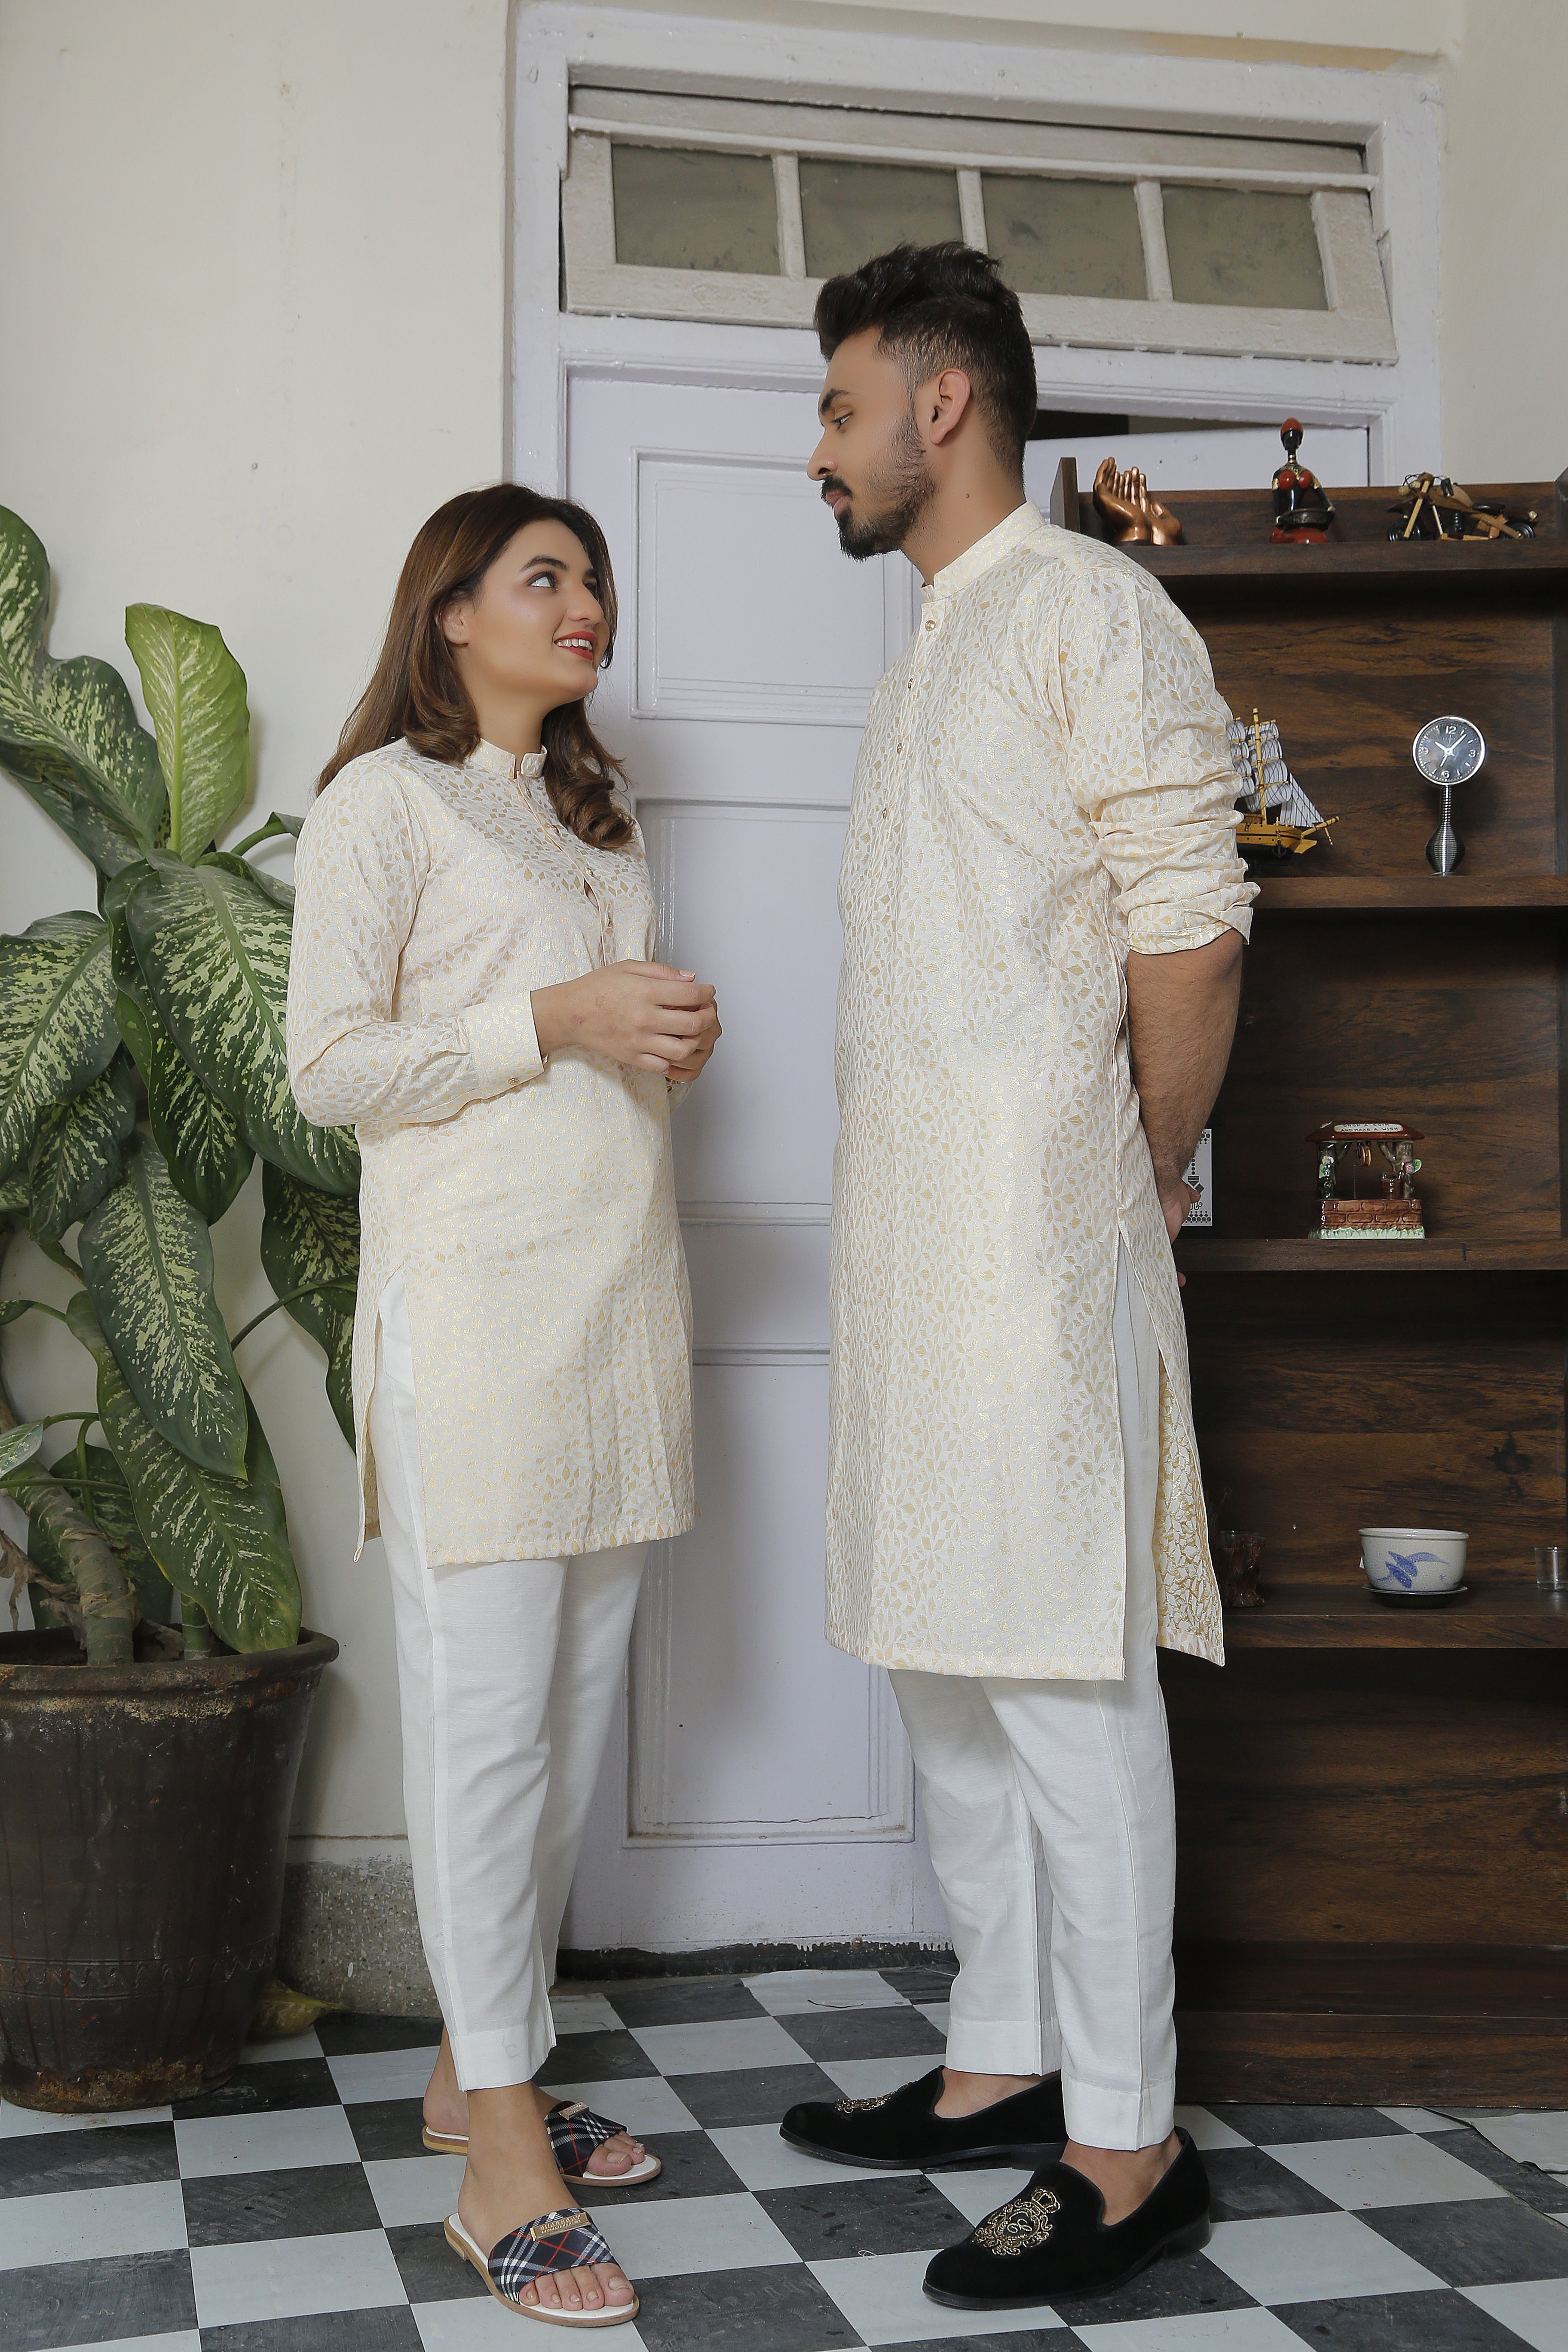 ER Self CP 9 Self Gold Eid Kurta With White Trouser FOR Couples